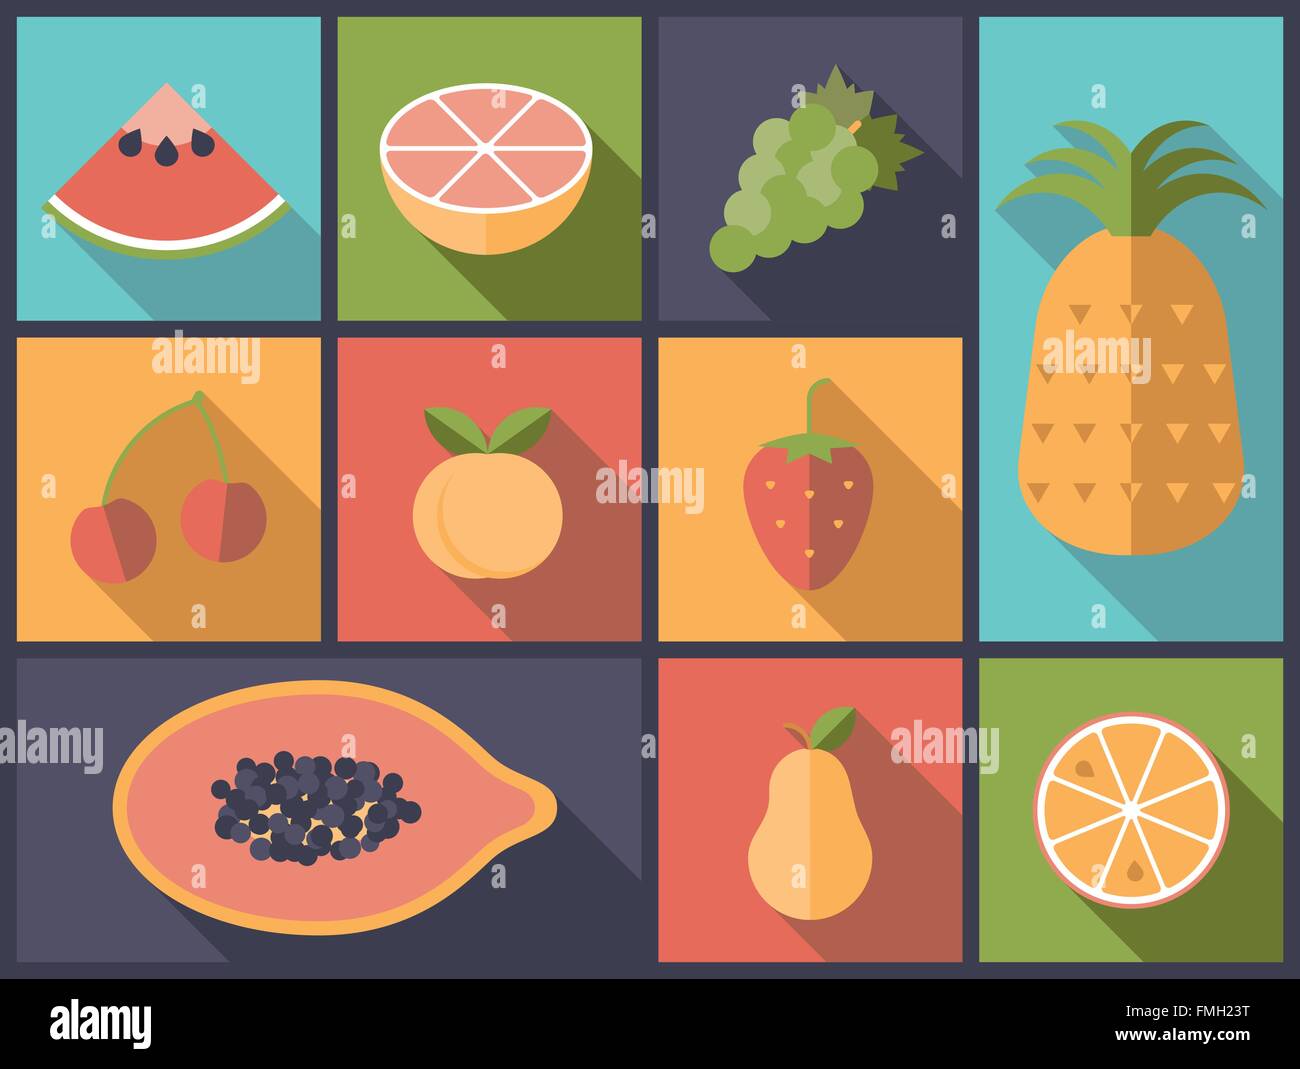 Flat design illustration with various fruit icons Stock Vector